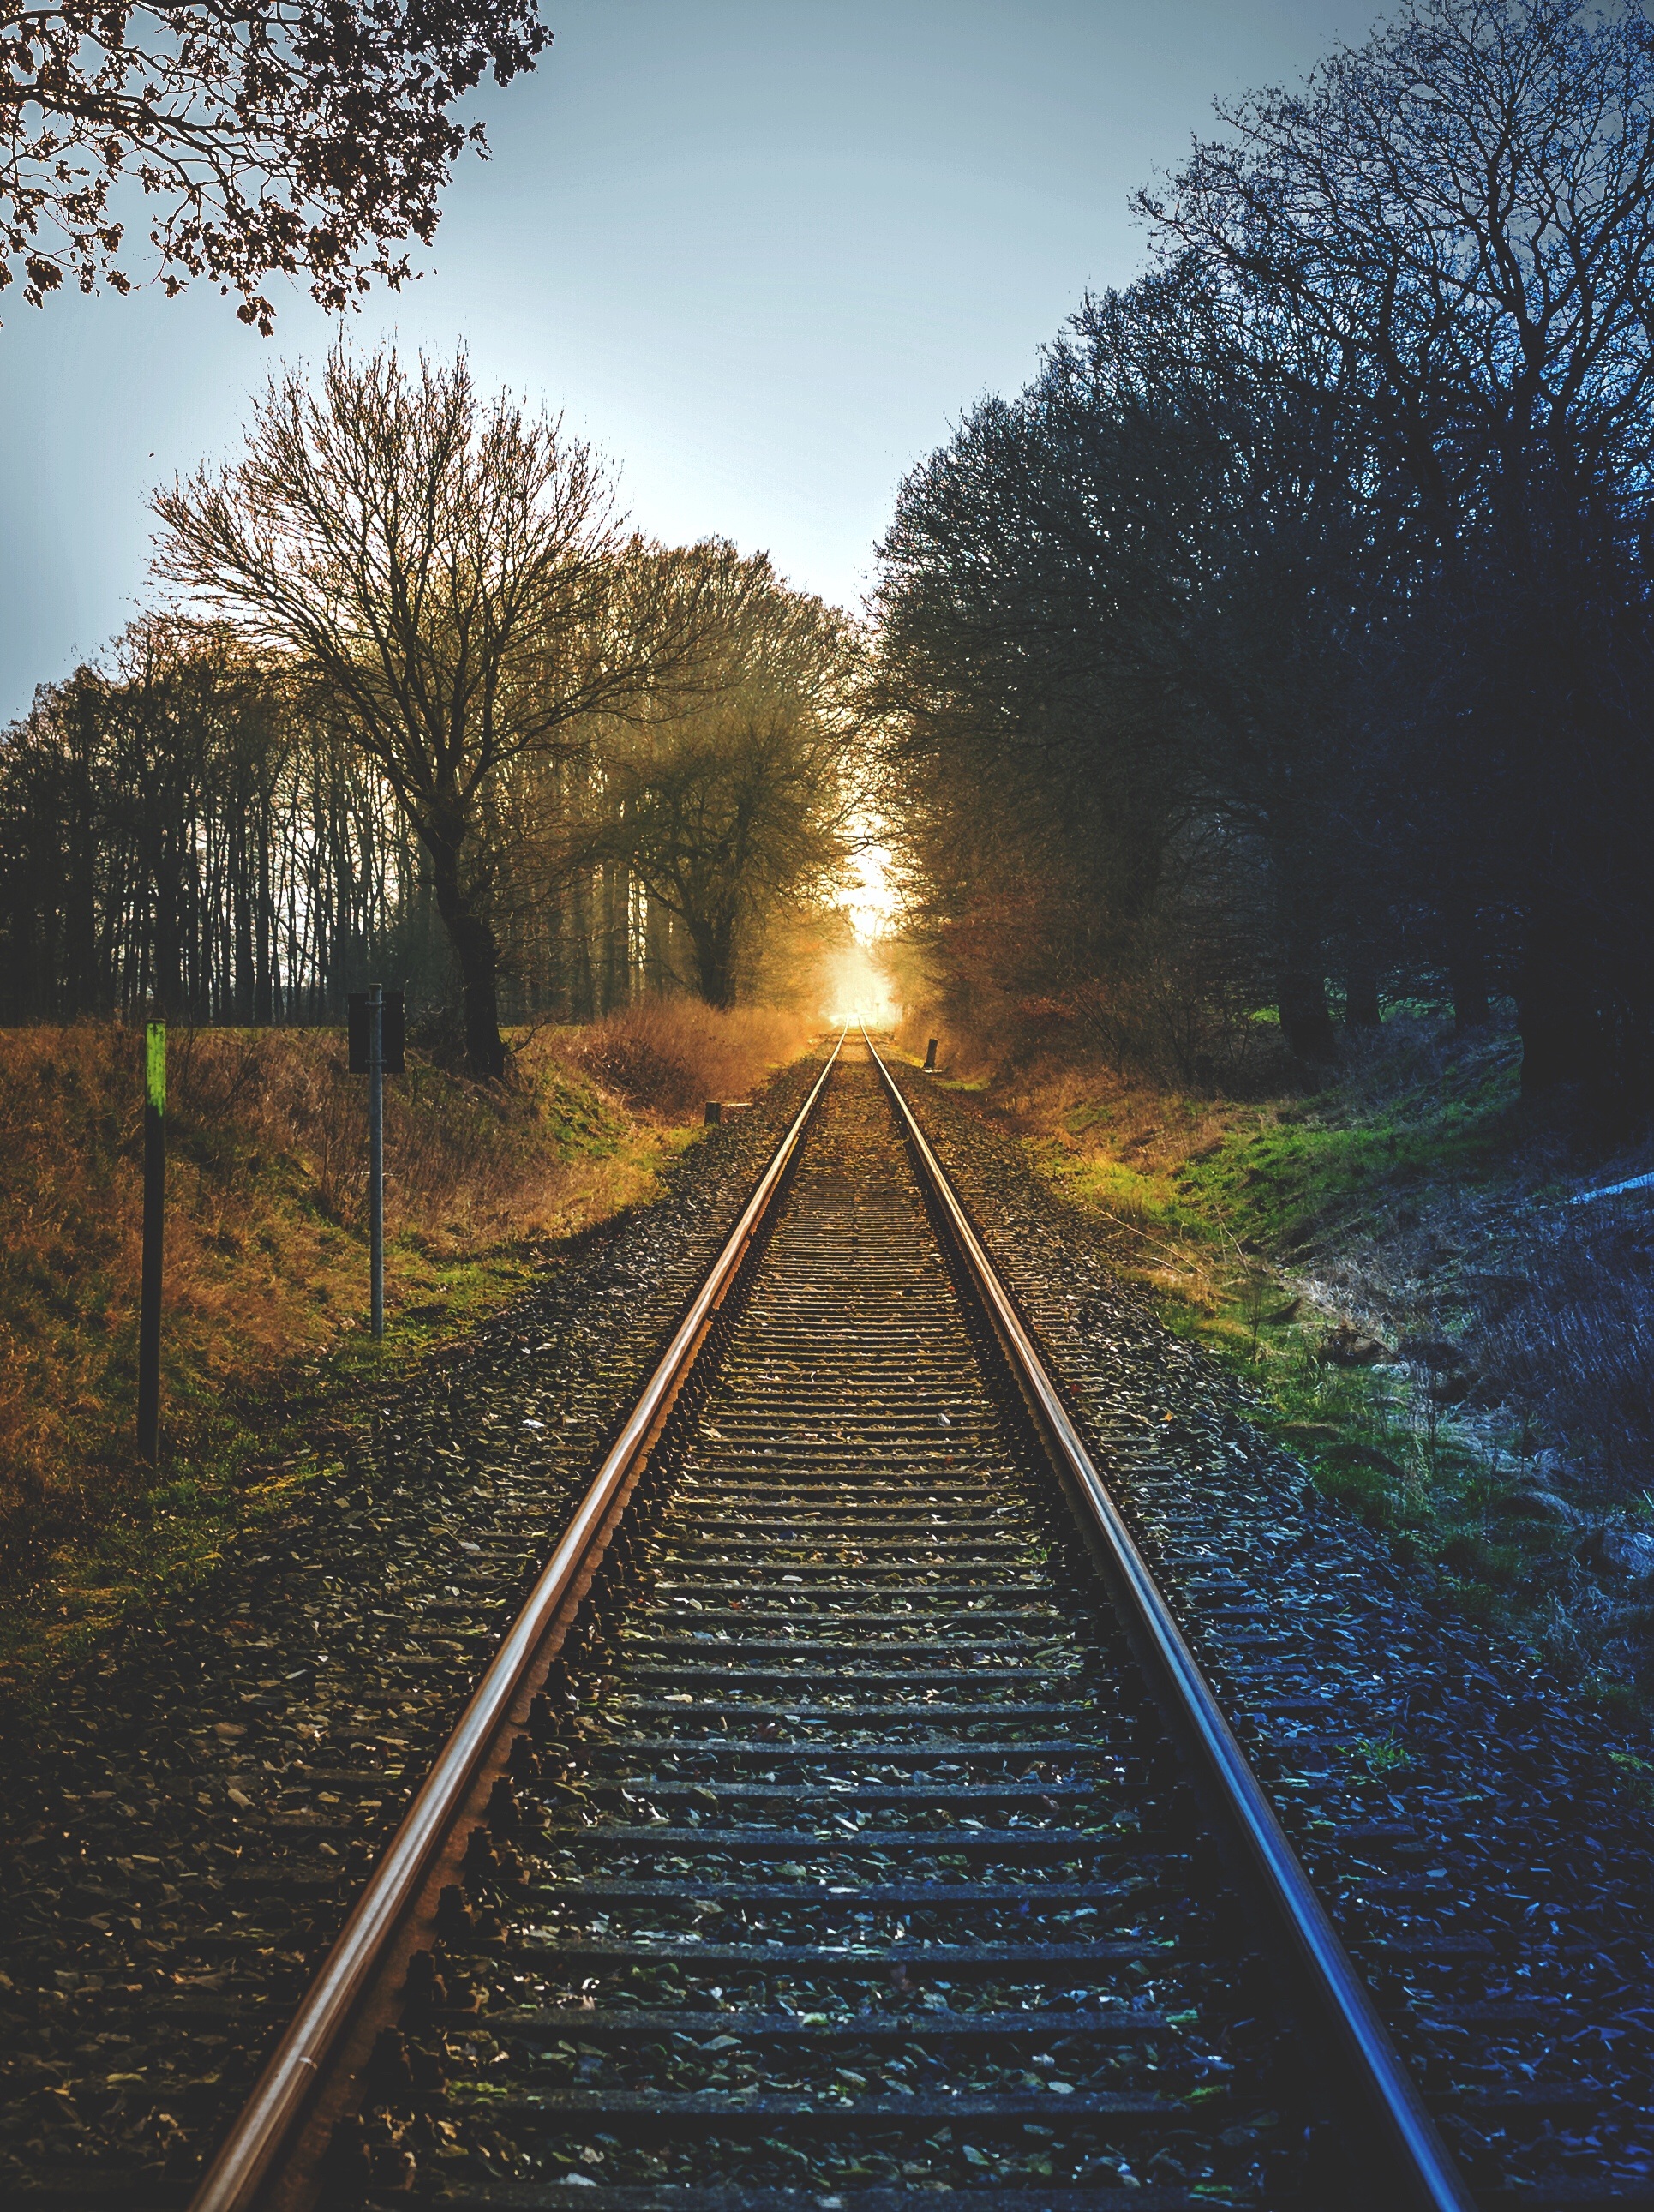 sunset, railway, nature, trees High Definition image